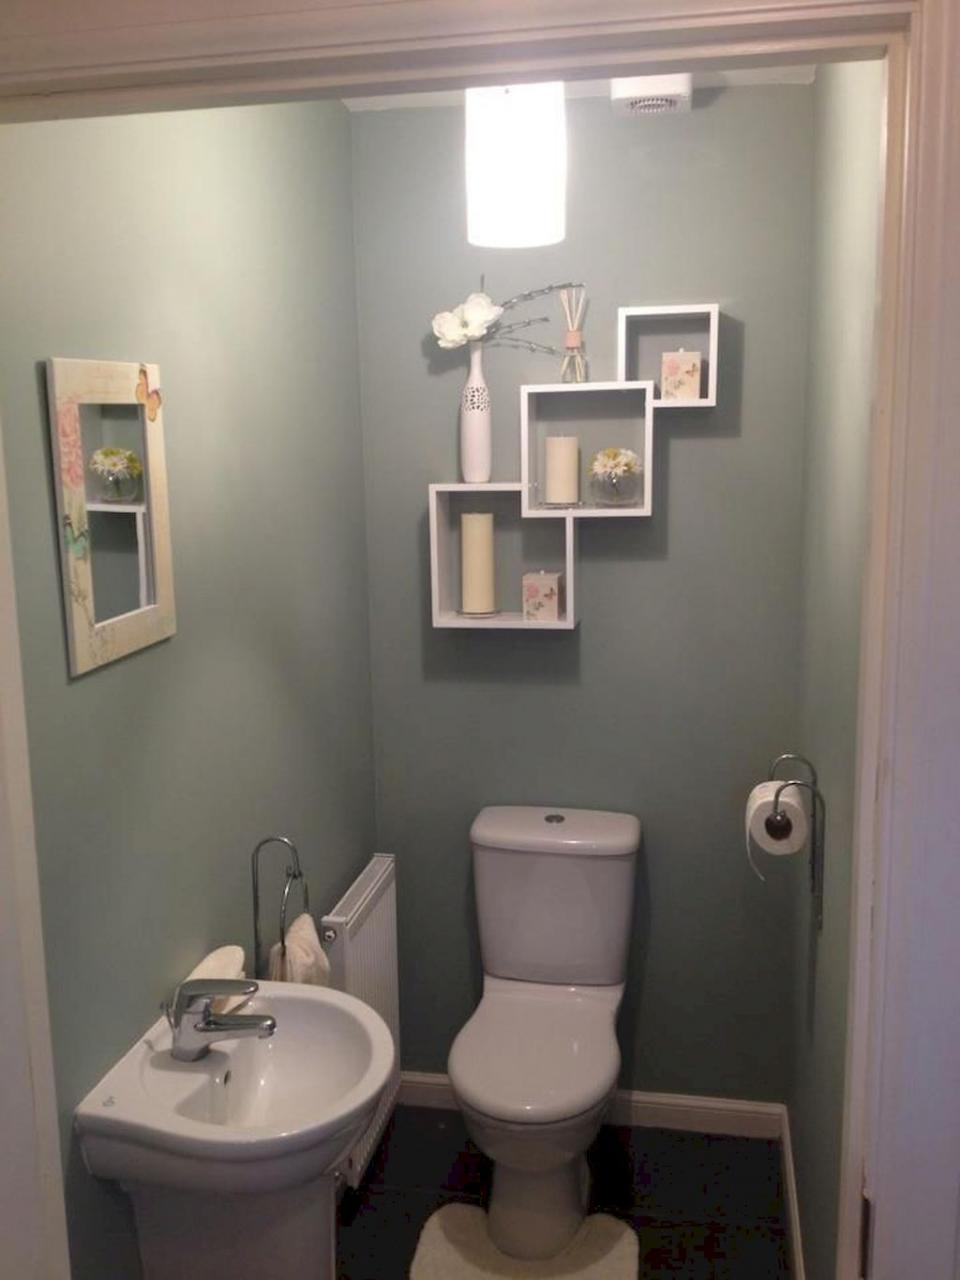 Space Saving Toilet Design for Small Bathroom Home to Z Small toilet